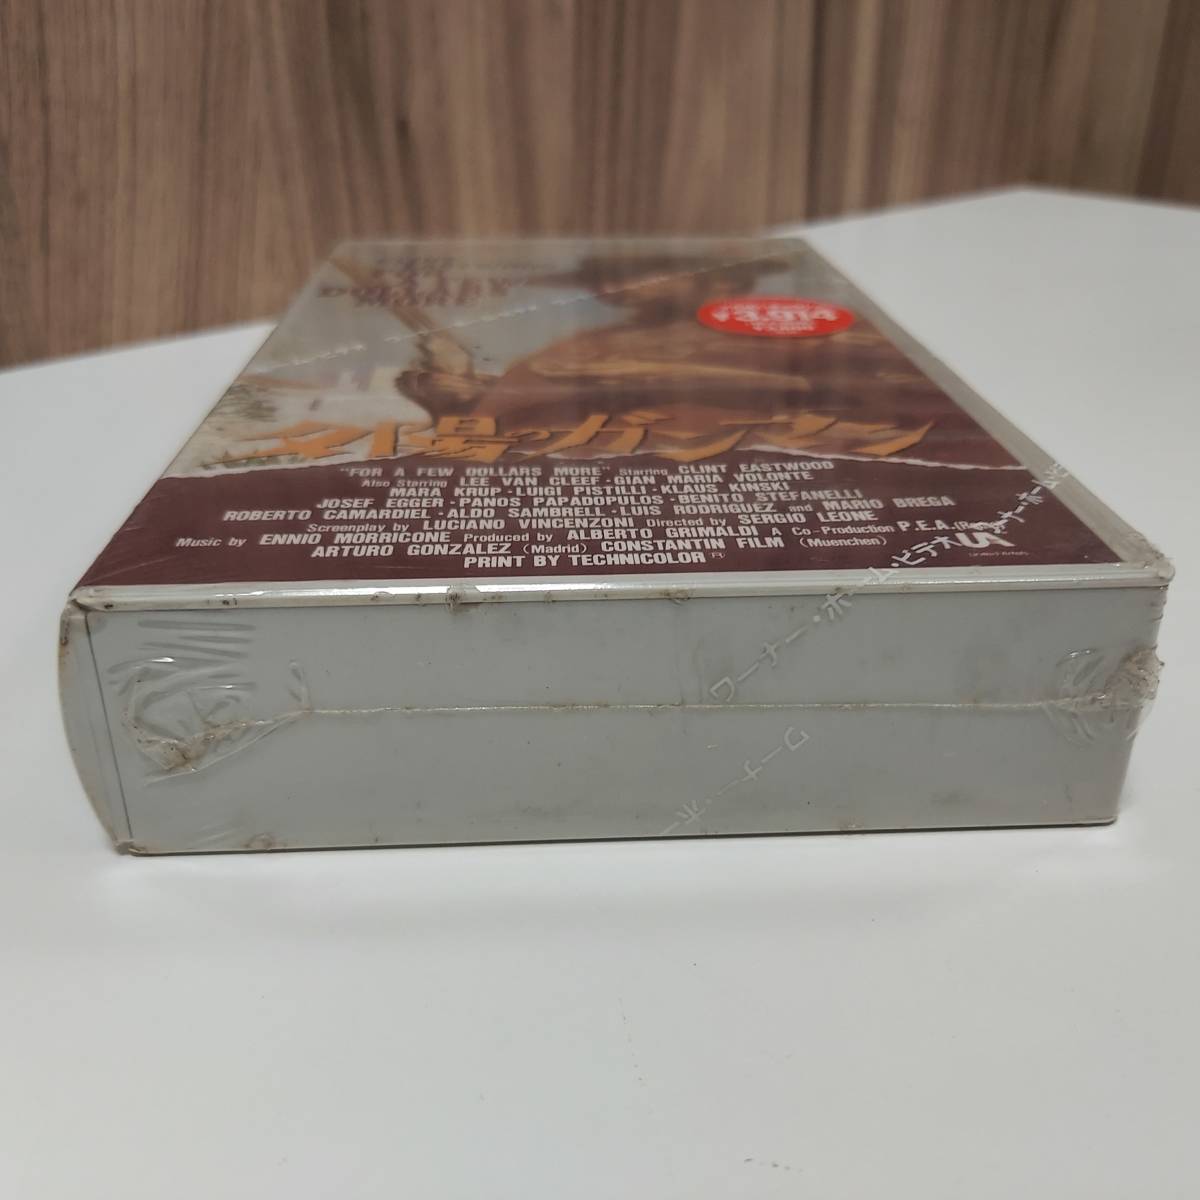  unopened goods k Lynn to* East wood ... Gamma nVHS videotape present condition goods *17432